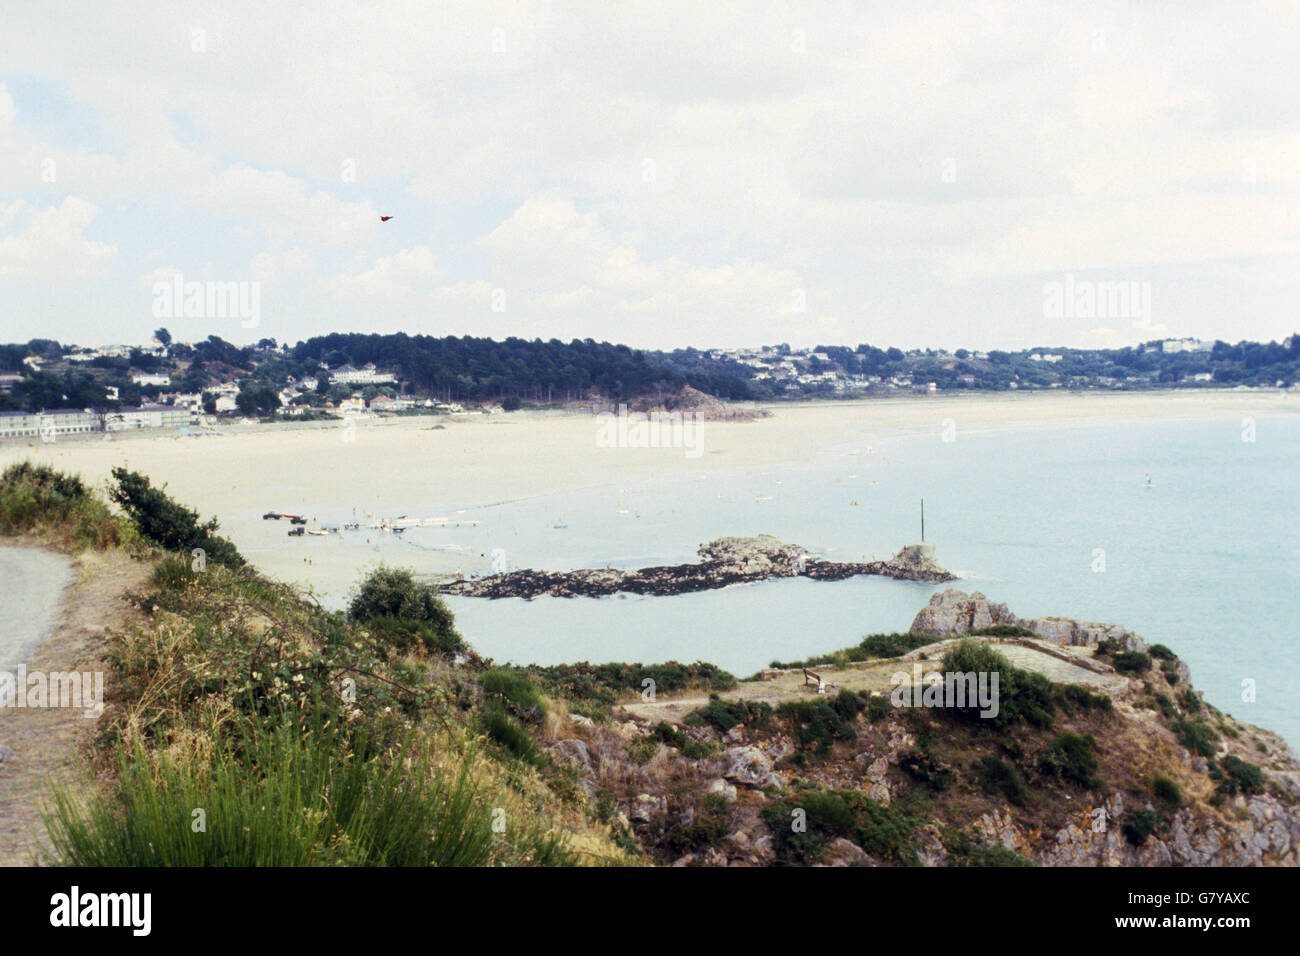 St Brelade's Bay, a well-known beauty spot on Jersey in the Channel Islands. Stock Photo